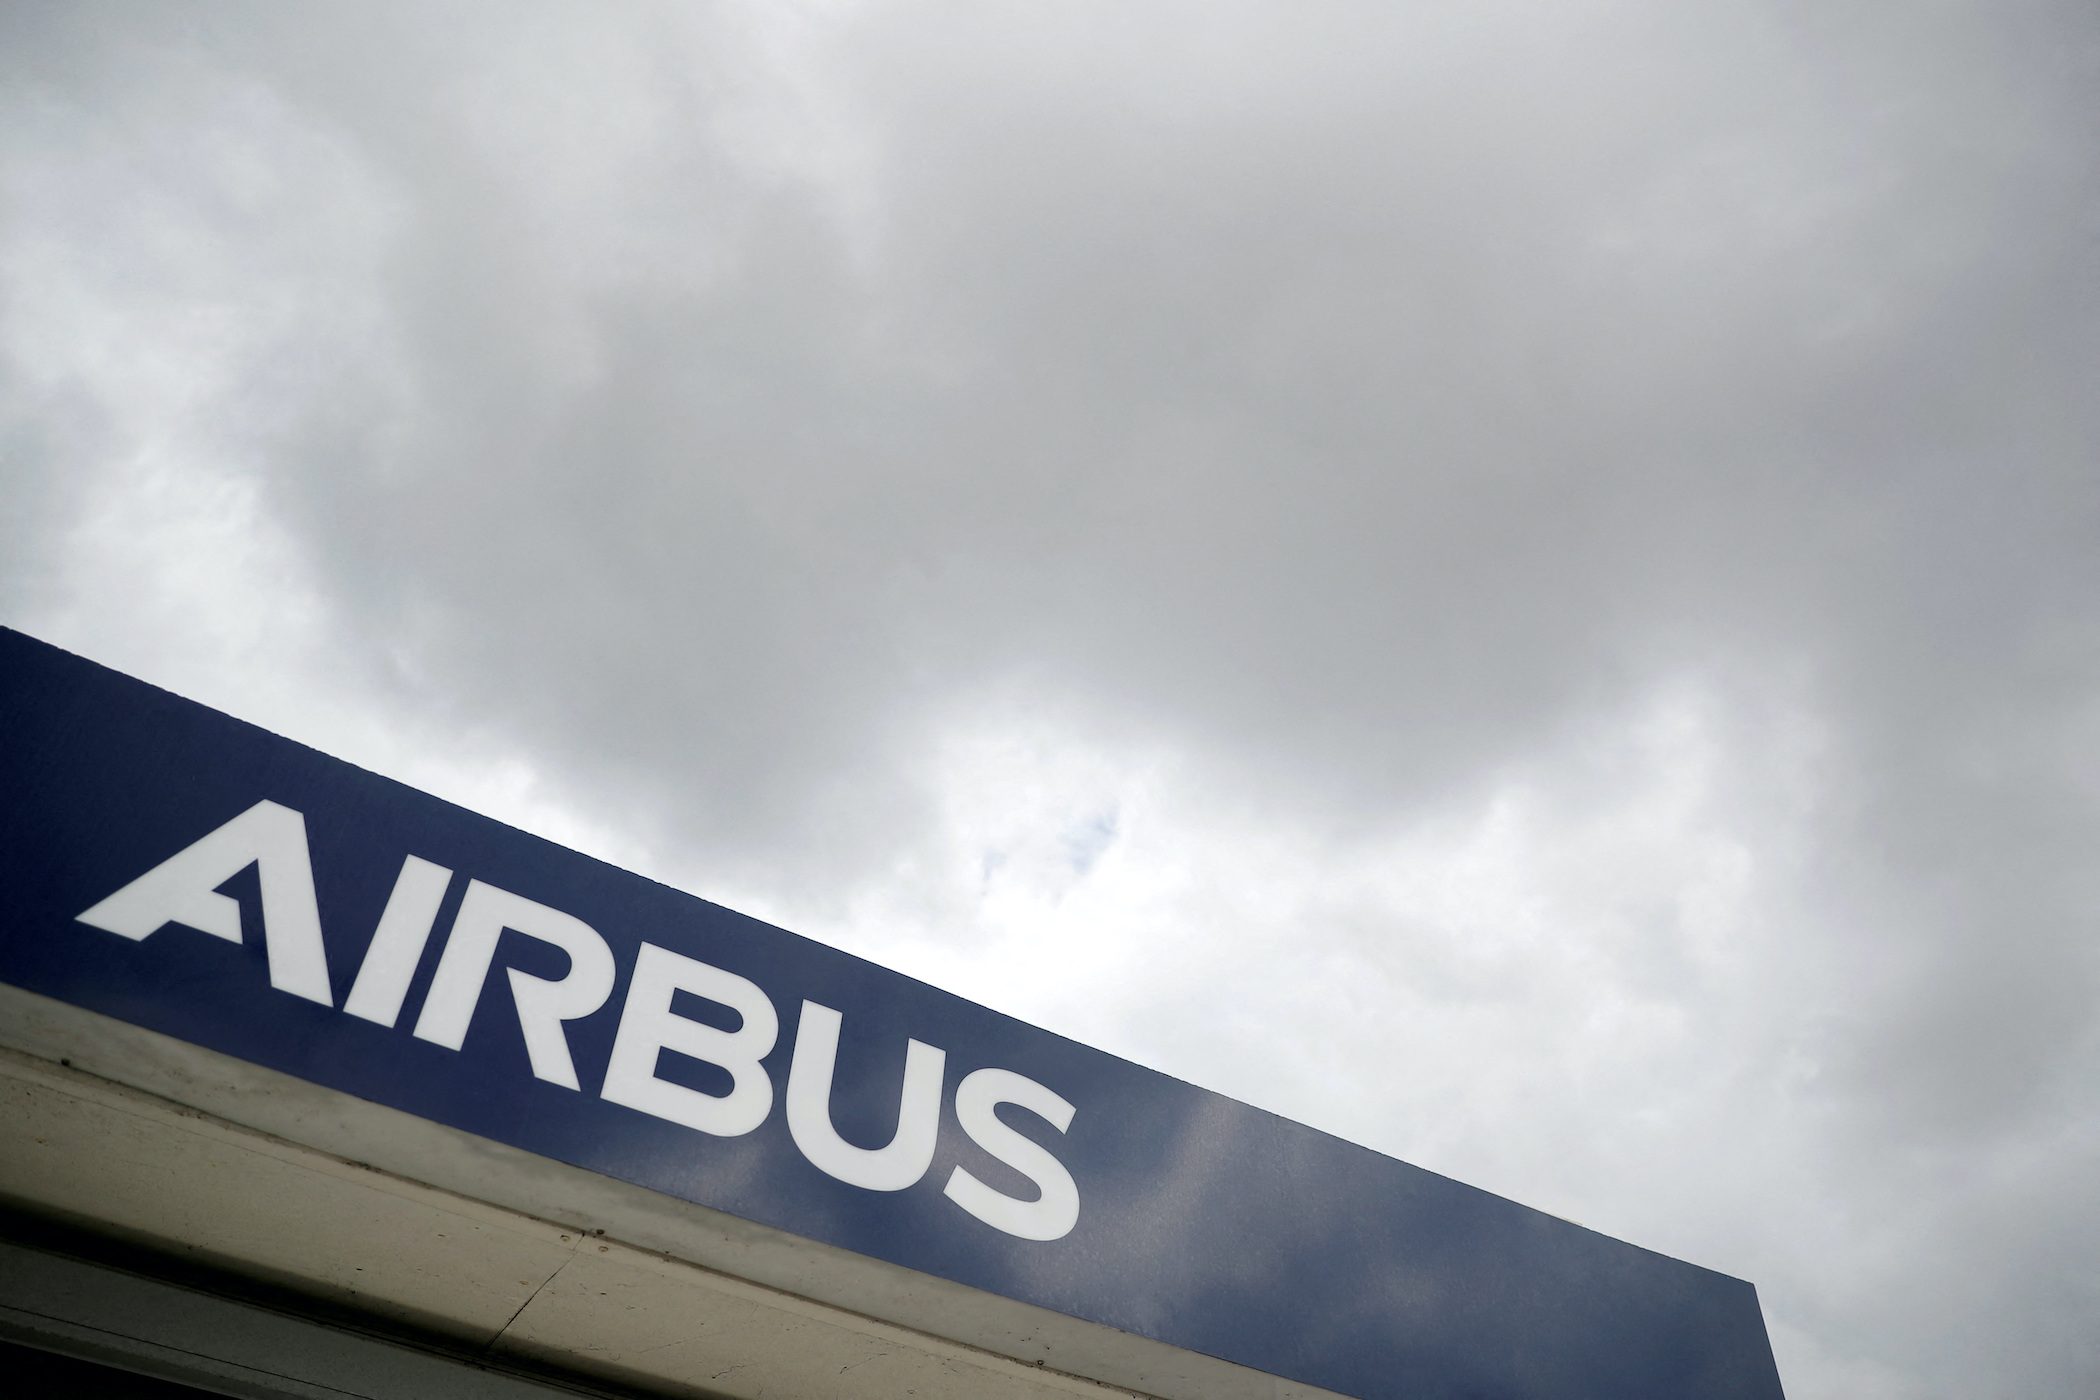 Missing parts force Airbus to cut near-term supply goals